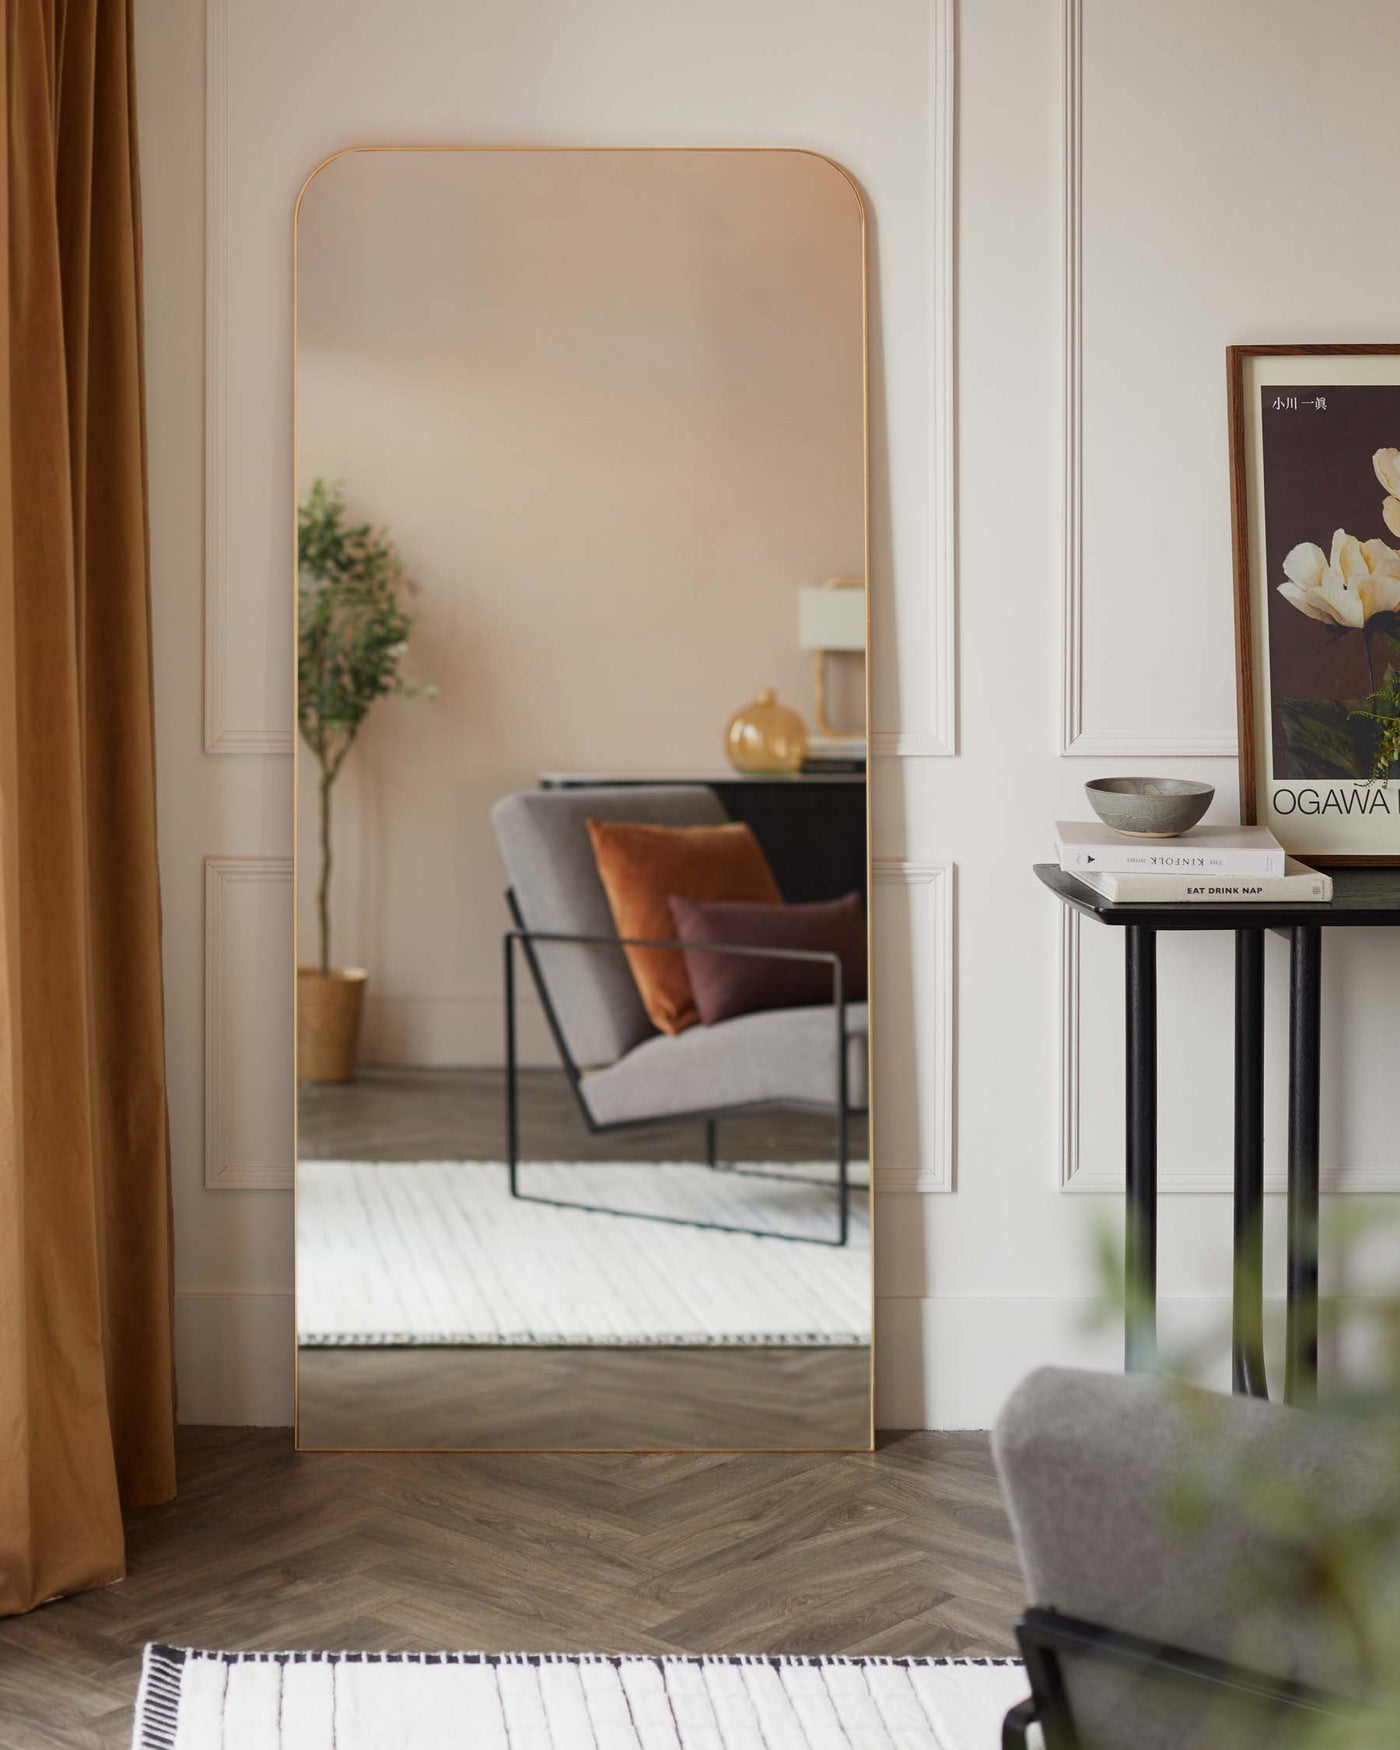 Elegant interior with a large, free-standing floor mirror with a minimalist rose gold frame. To the right, there is a sophisticated round side table with a black metal frame and dark tabletop, adorned with a small bowl and books. Reflected in the mirror is a stylish grey armchair with a black metal frame, complemented by an orange cushion. A framed picture, decorative vase, and potted plant add to the ambiance, creating a cosy and chic living space.